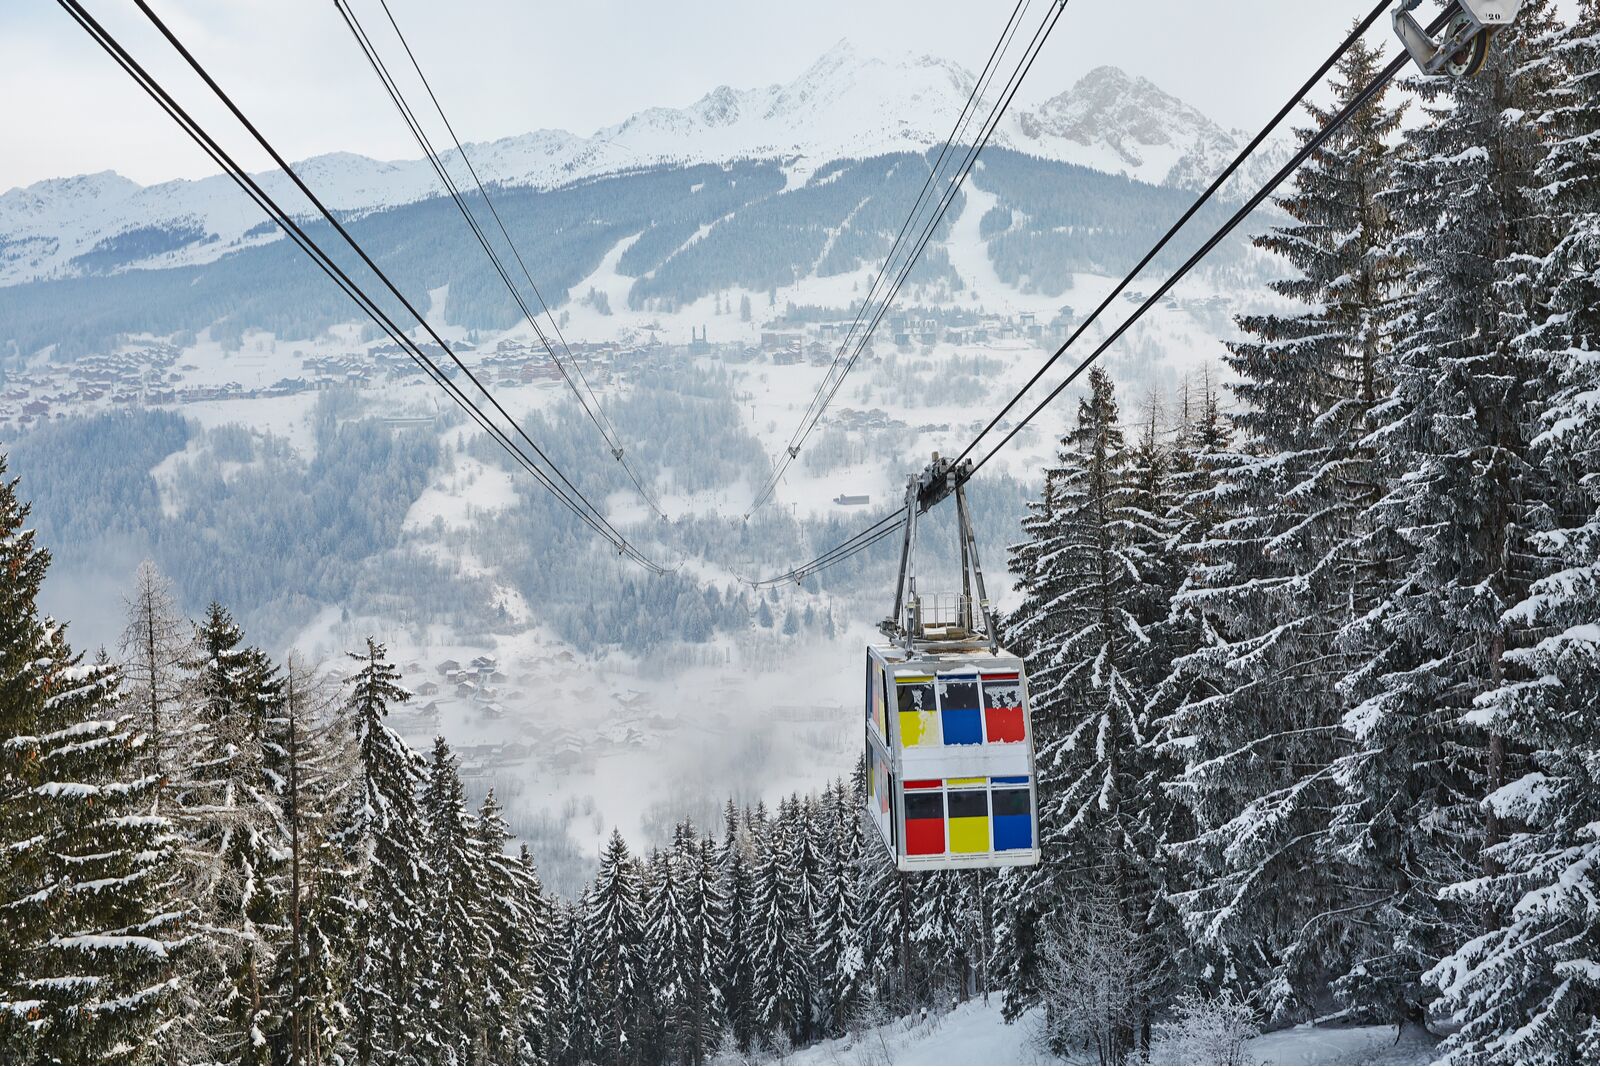 The Vanoise Express is one of the world's coolest ski gondolas, connecting to parts of Paradiski, La Plagne and Les Arcs